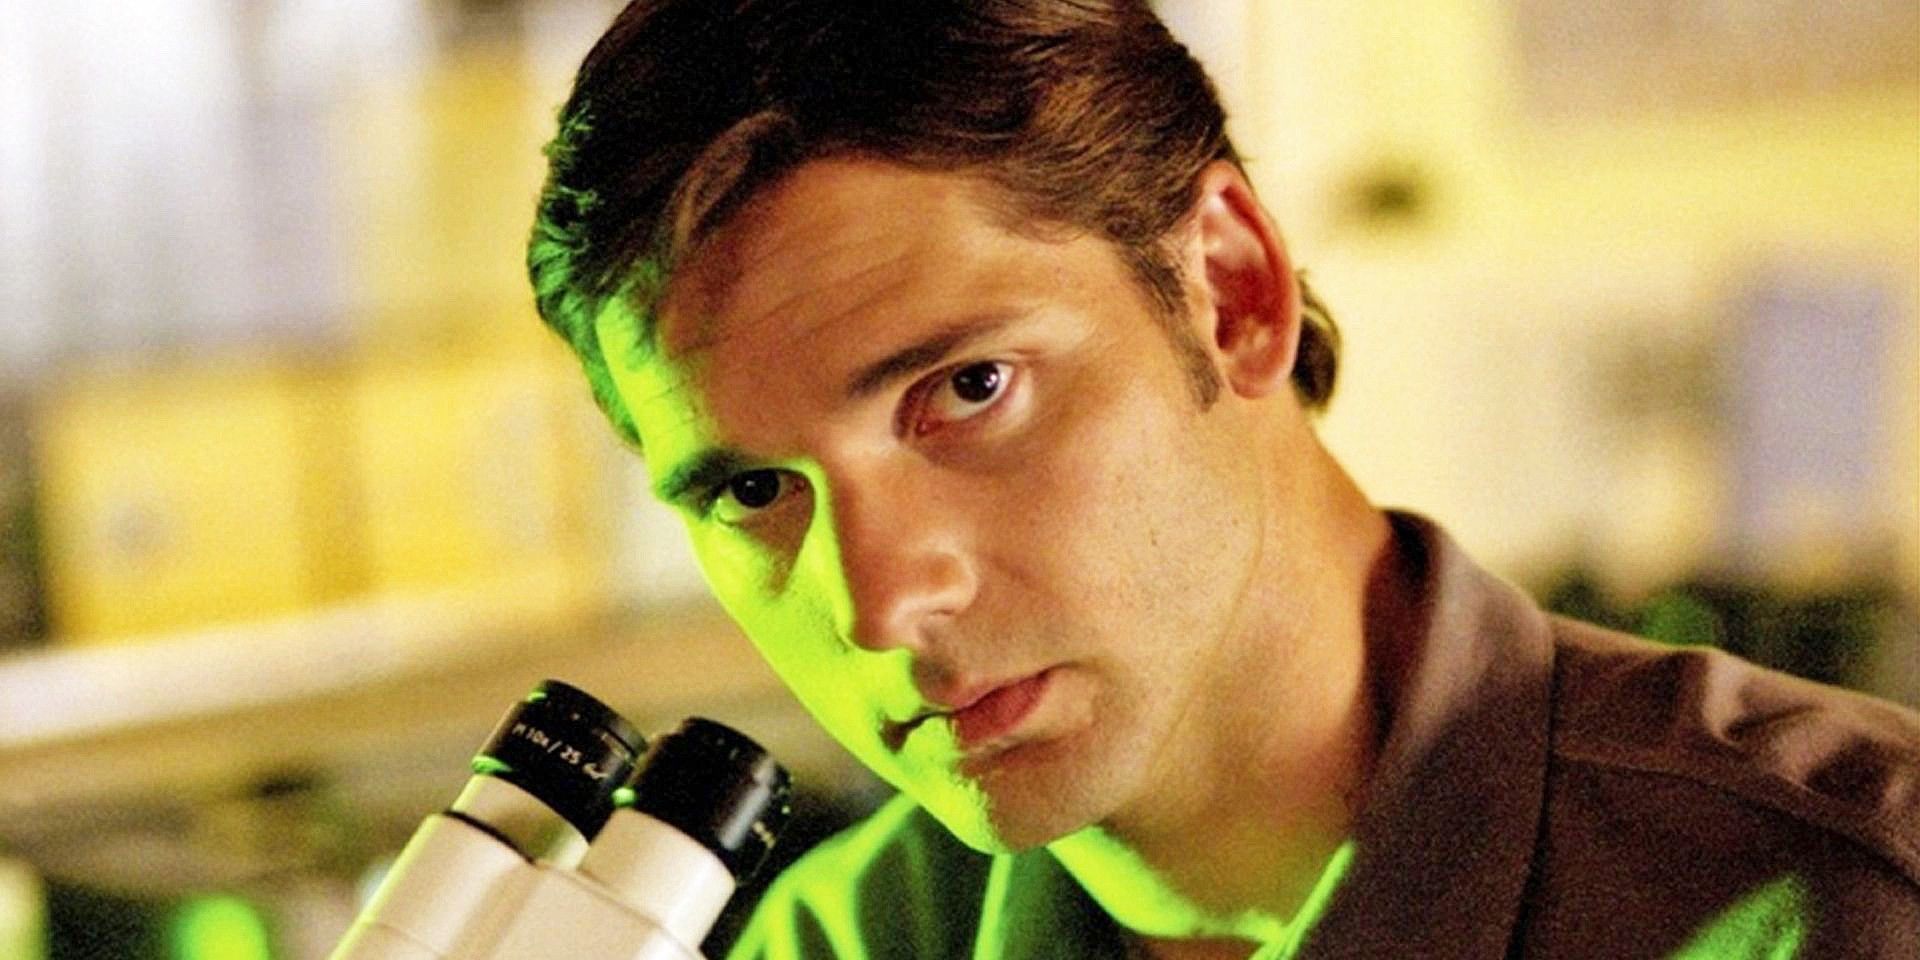 Eric Bana as Bruce Banner in Hulk Movie looking into the camera